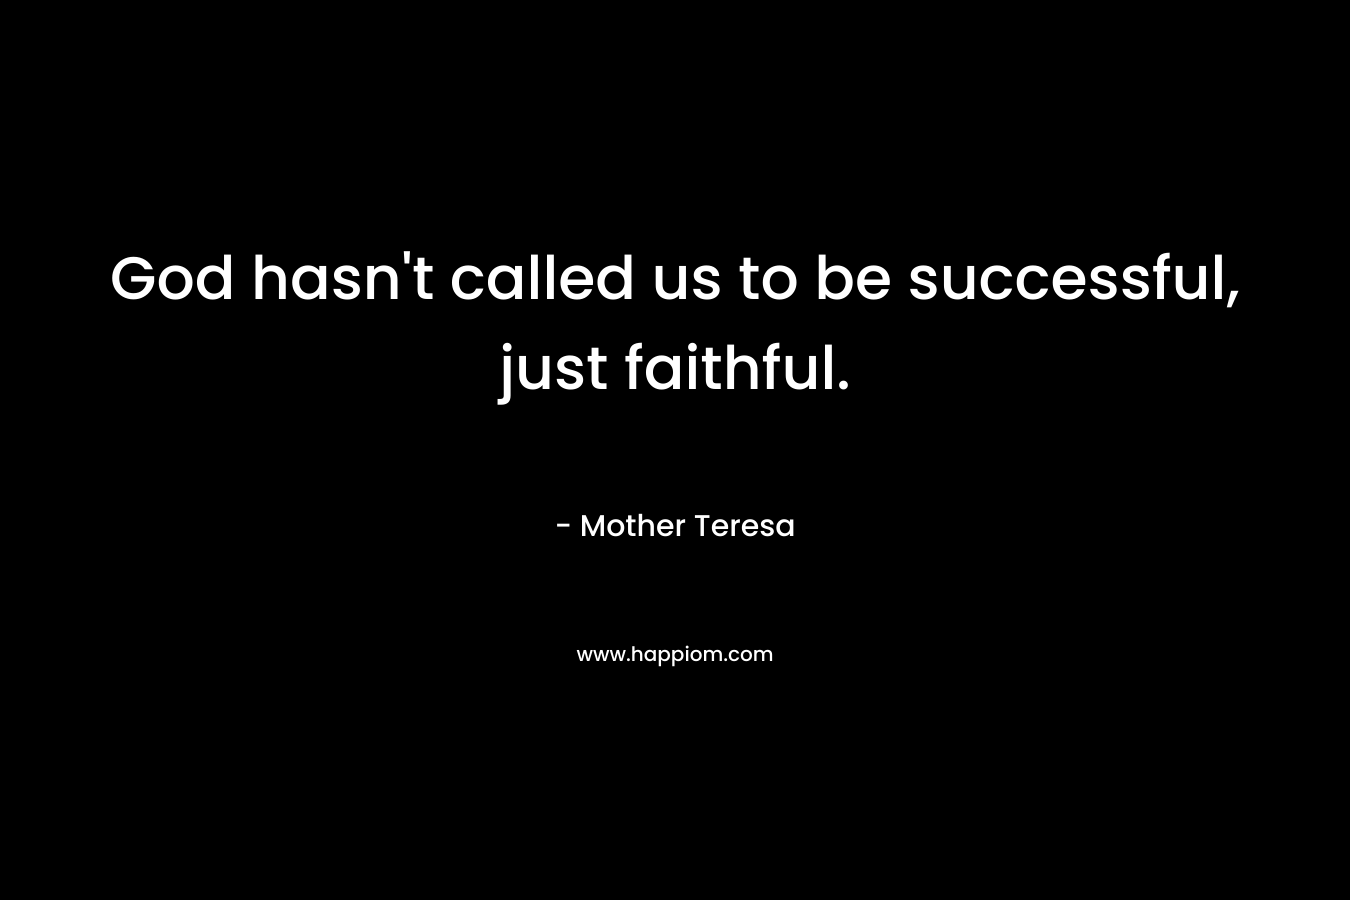 God hasn't called us to be successful, just faithful.